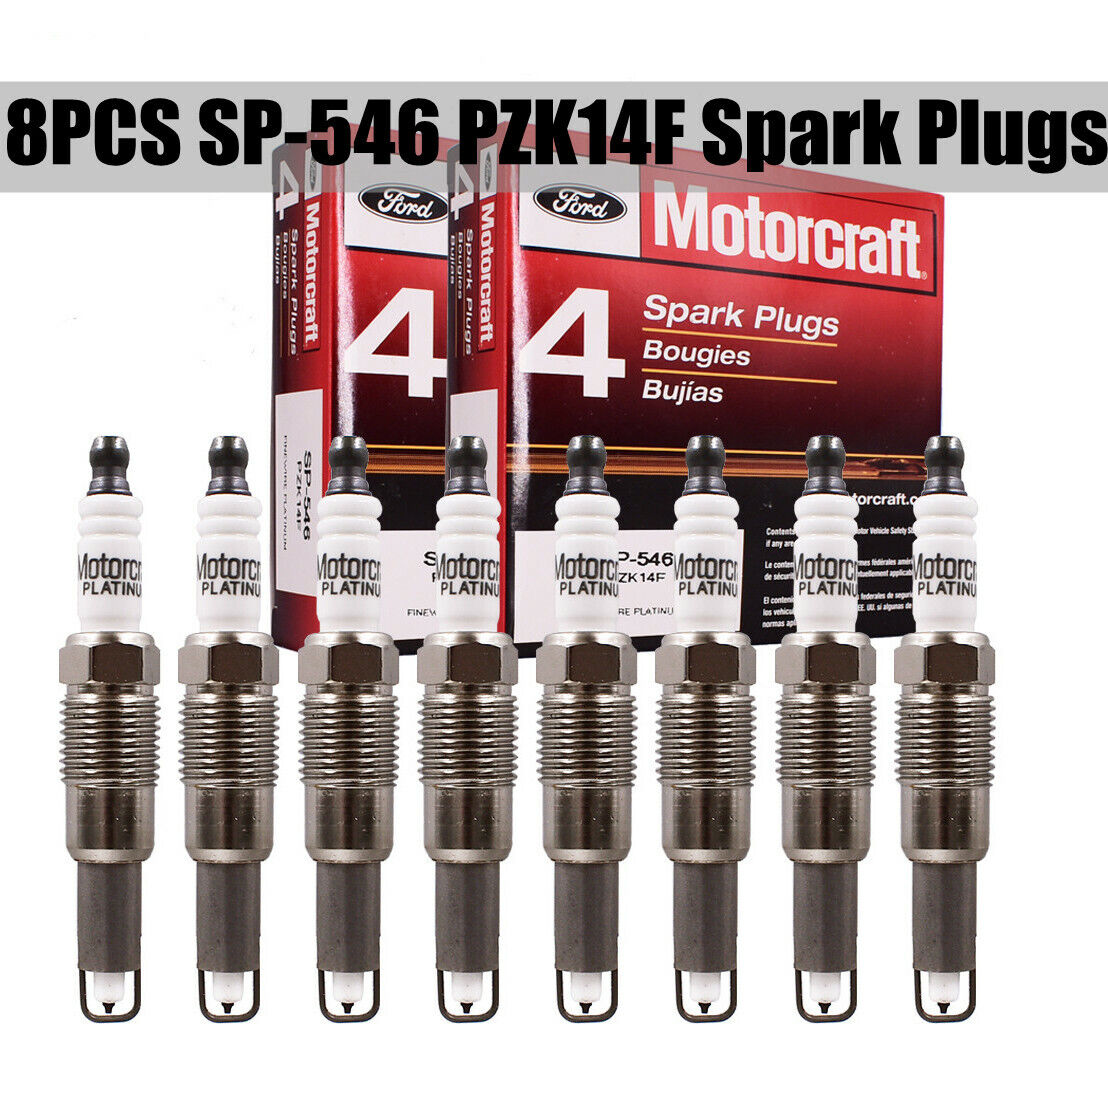 8Pcs Motorcraft SP546 Spark Plugs SP-546 PZK14F Genuine New For Ford F150 F250